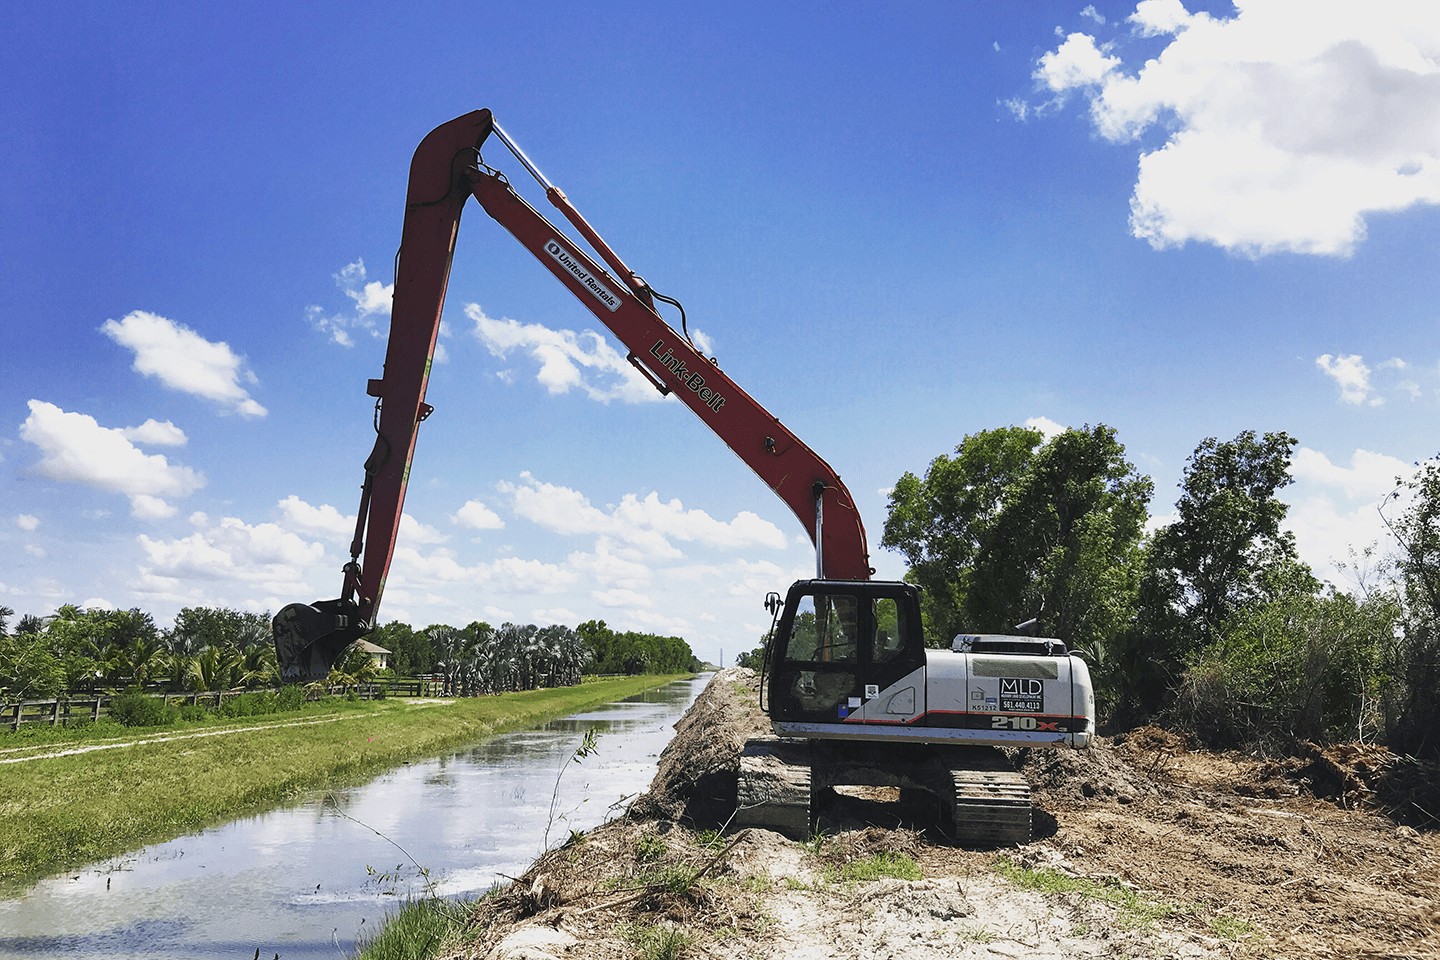 Excavator preparing to dig dirt out of a canal